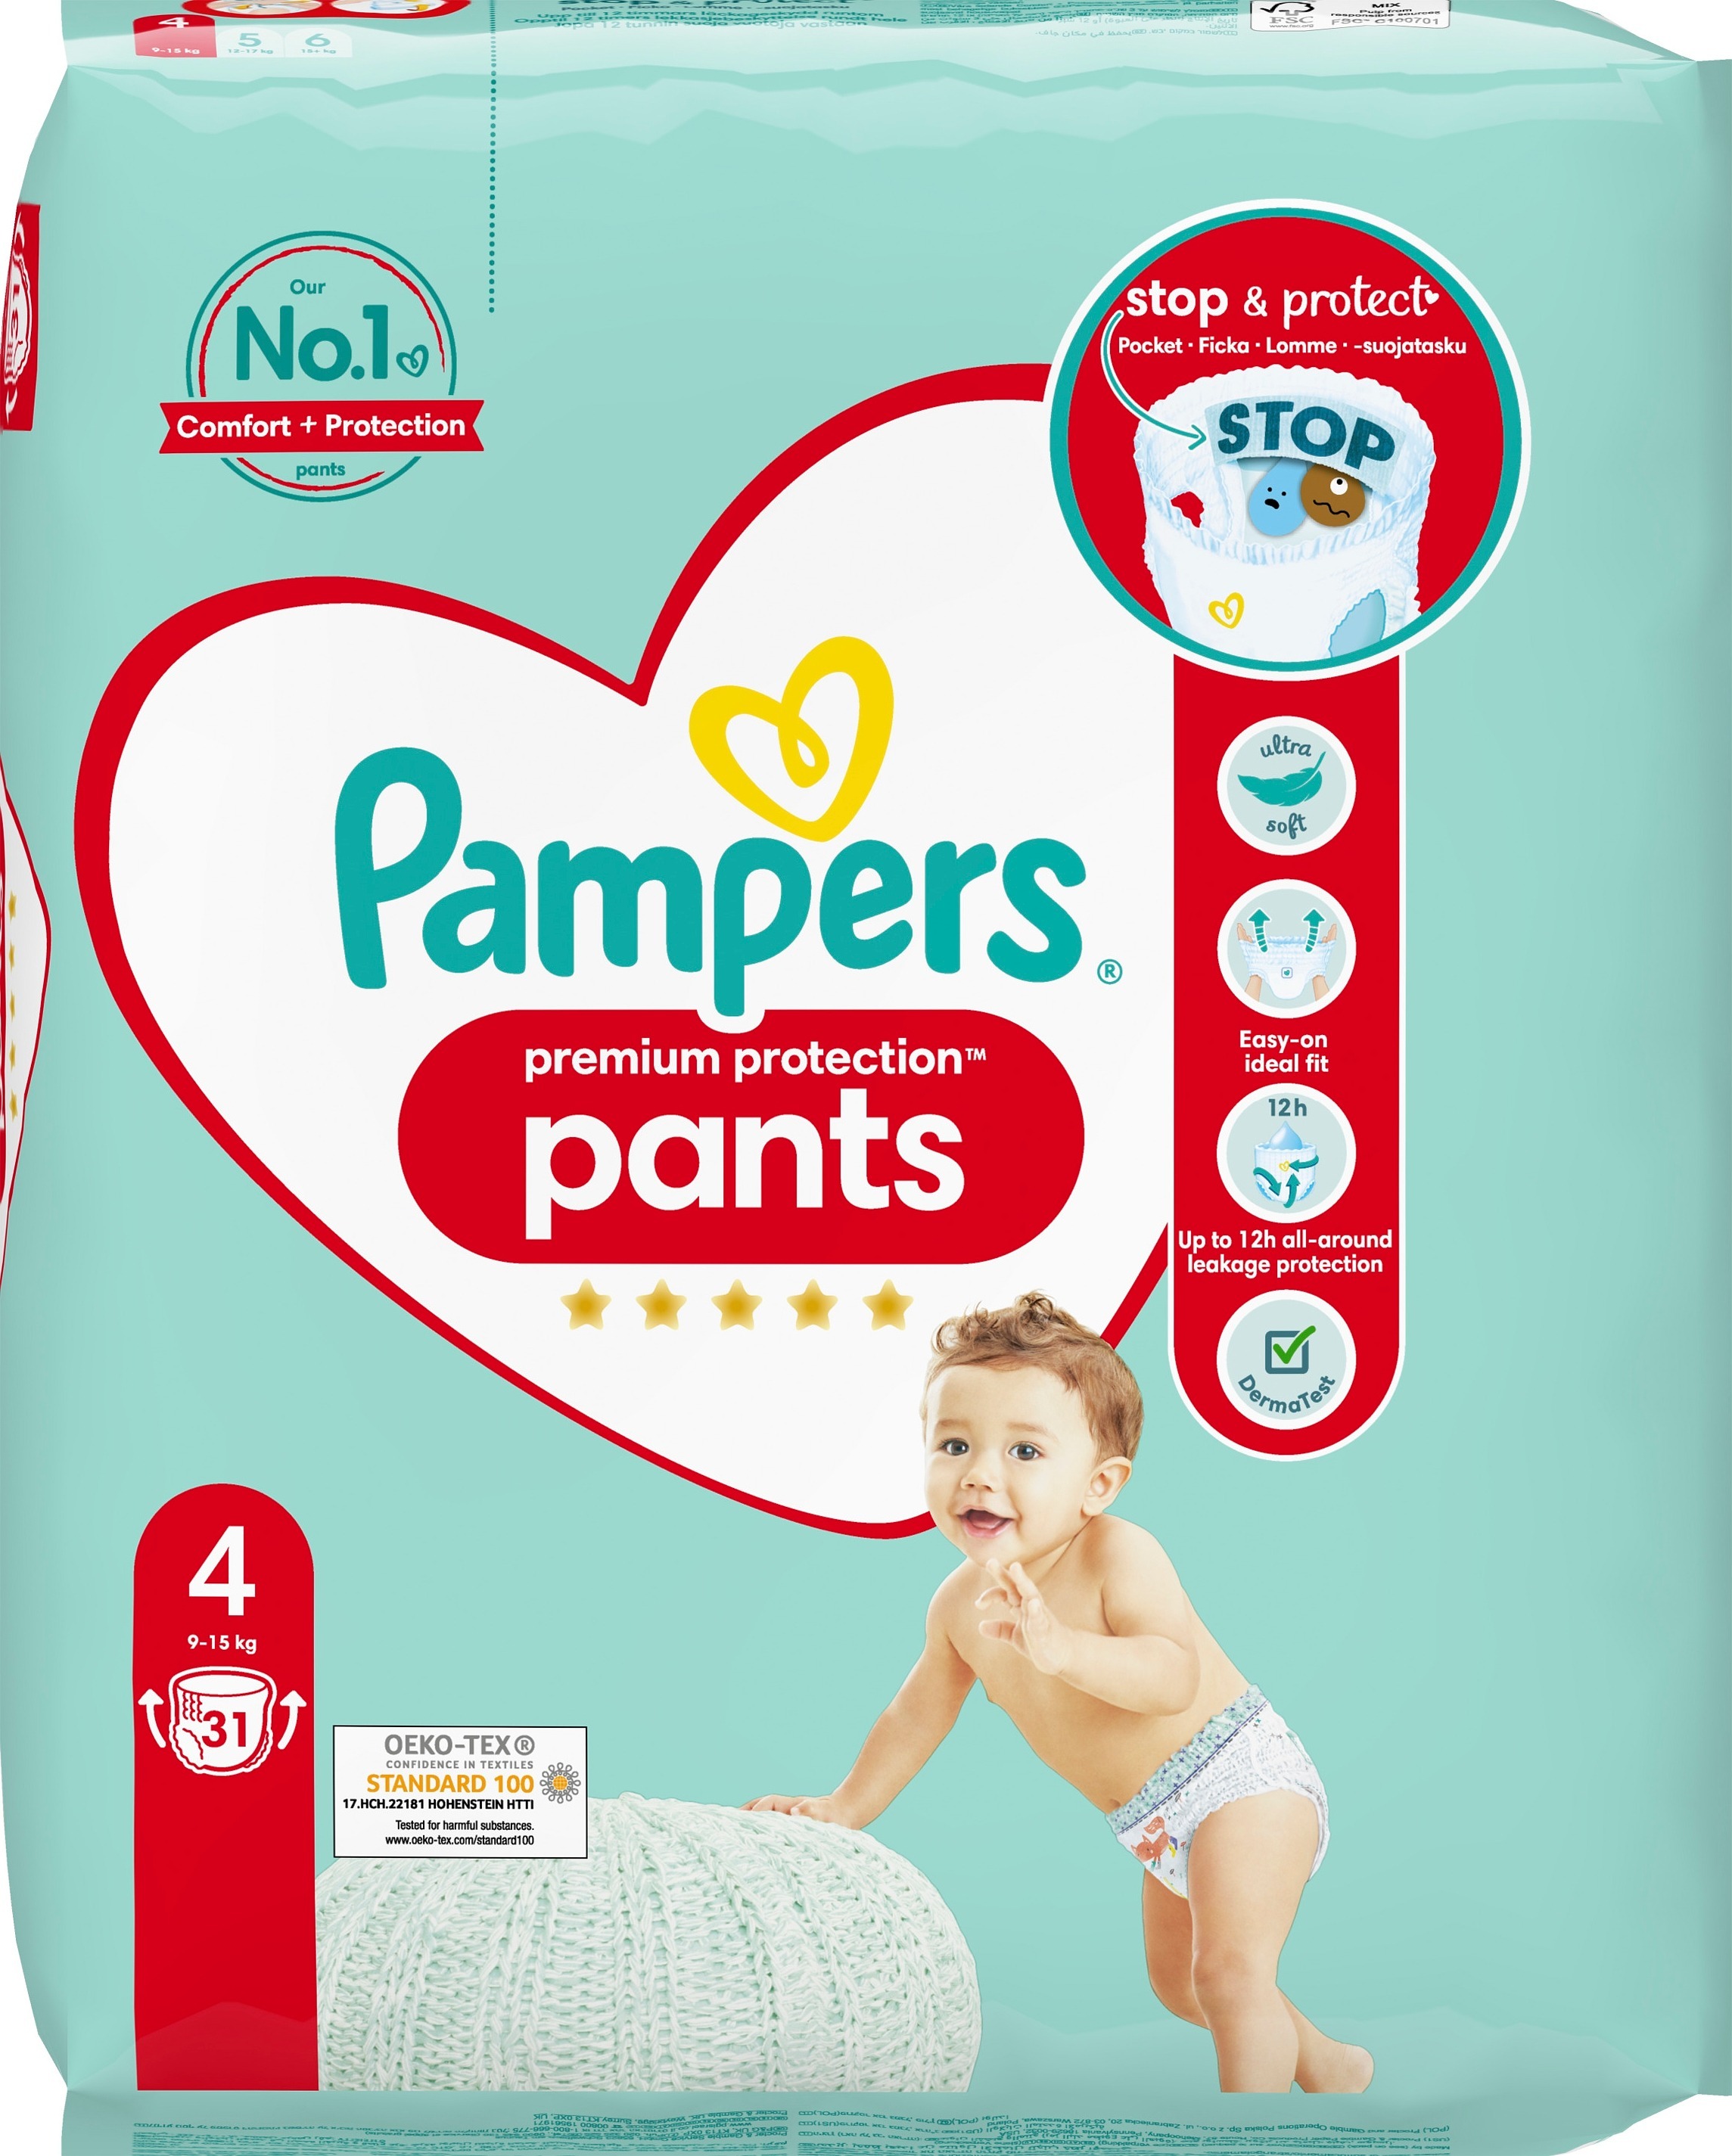 Pampers Premium Protection Pants 4 (9-15kg) 31 st